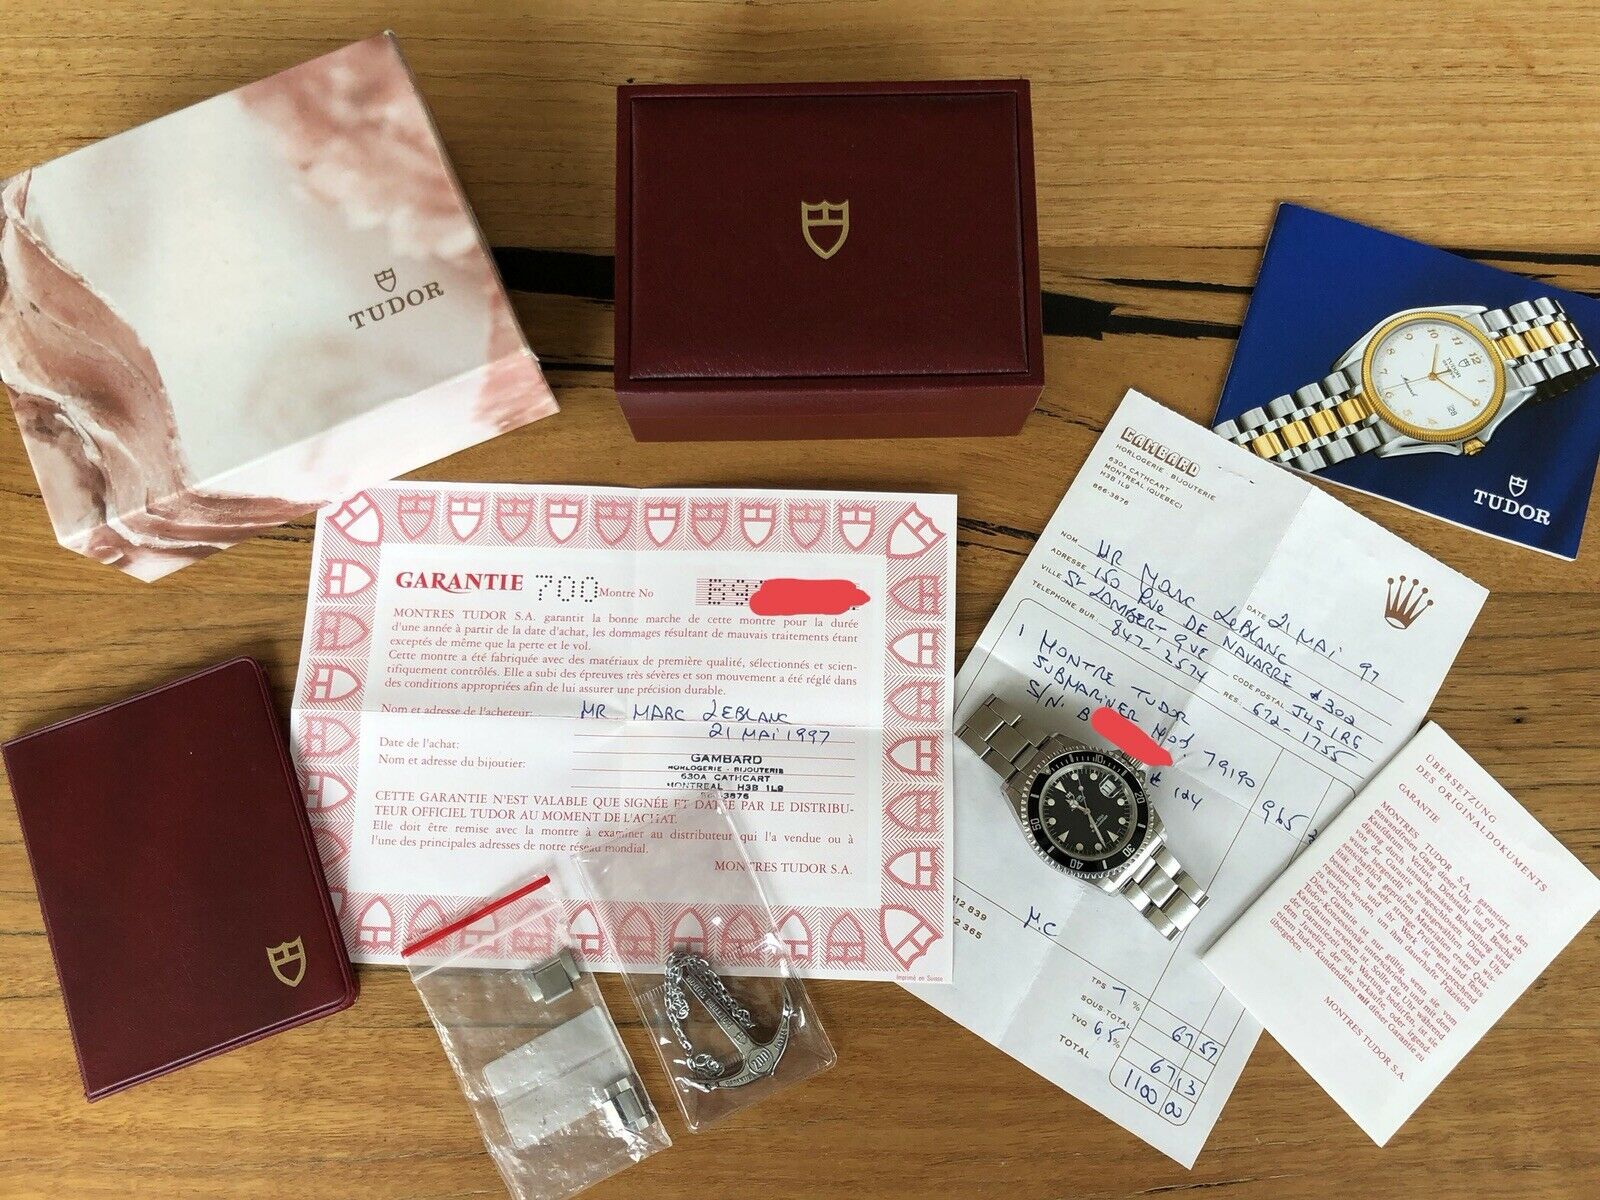 Tudor Submariner 79190 - 1997 Box and Papers